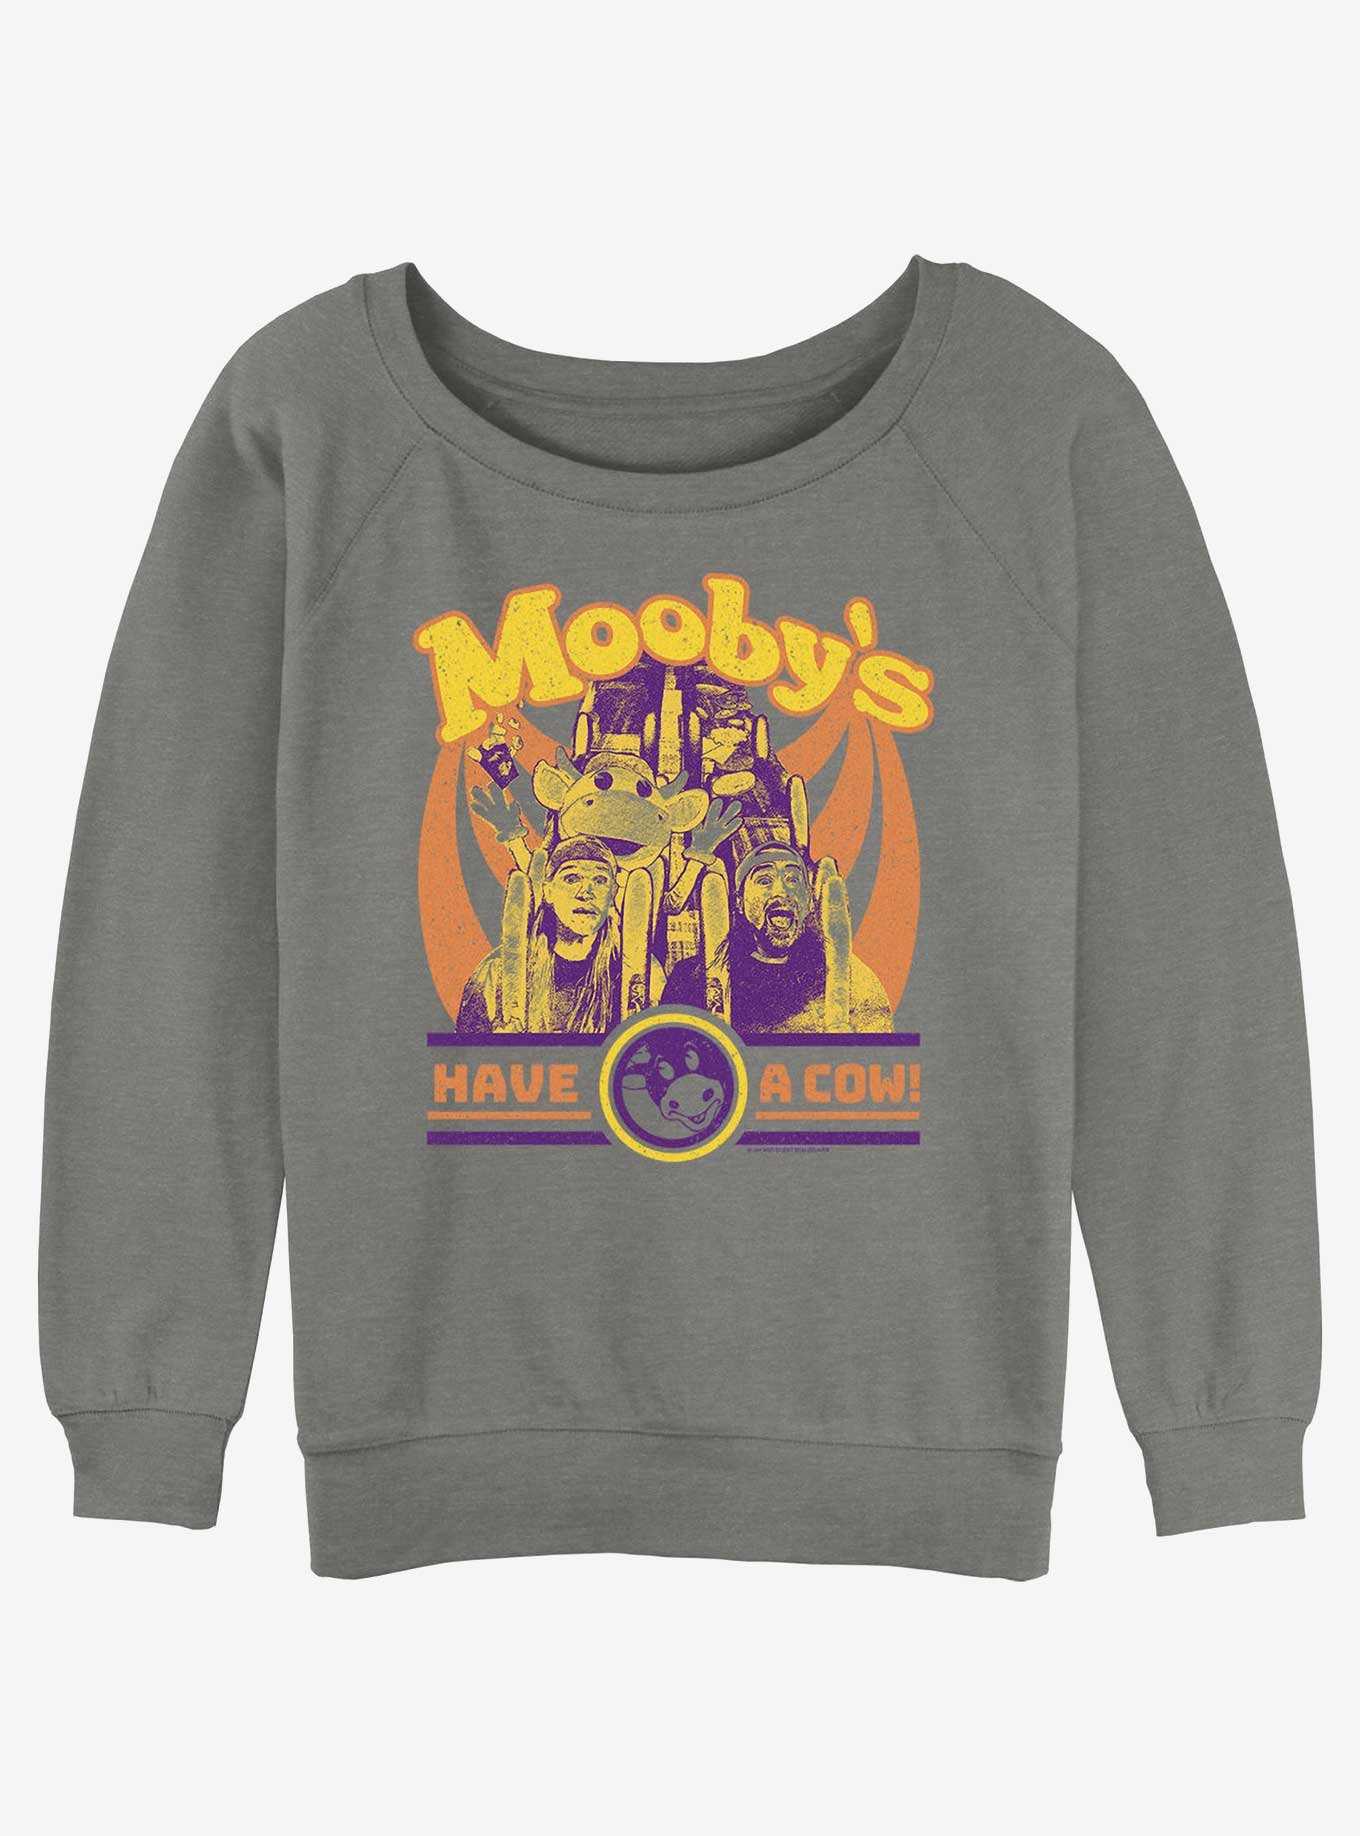 Jay and Silent Bob Mooby's Have A Cow Girls Slouchy Sweatshirt, , hi-res